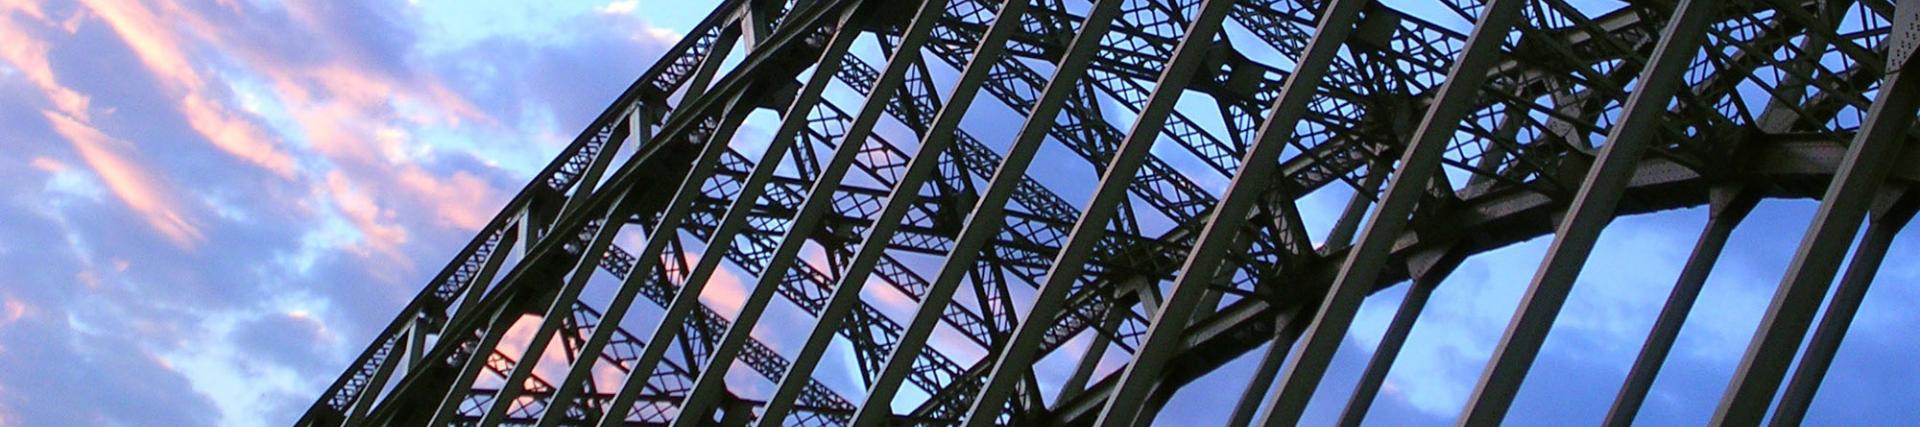 A curved iron bridge shot from below with a pink and blue sky in the background